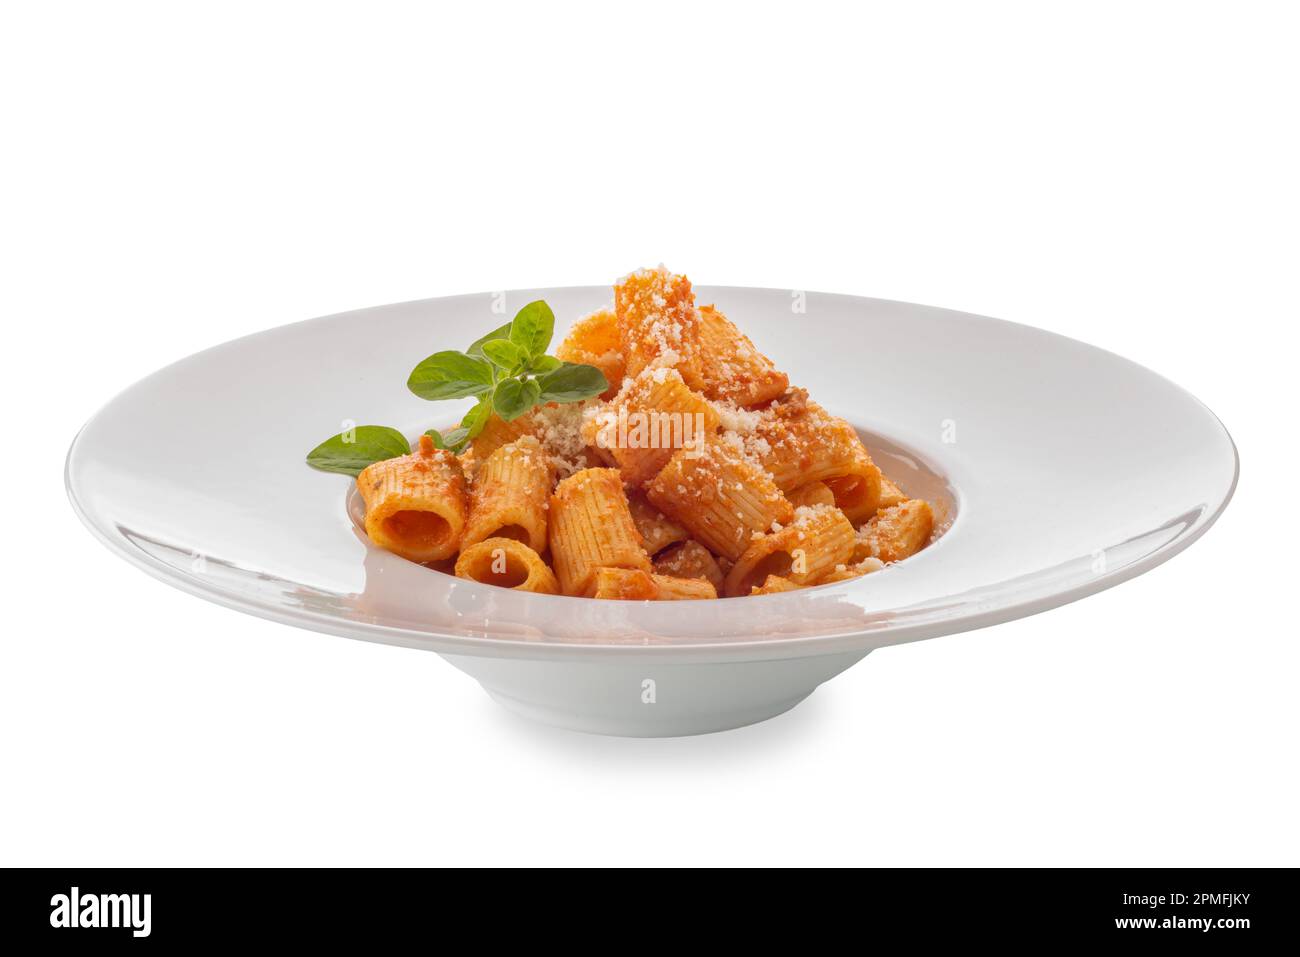 Mezze maniche macaroni with red tomato sauce and grated parmesan cheese and marjoram leaves in white plate, isolated on white, clipping path included Stock Photo